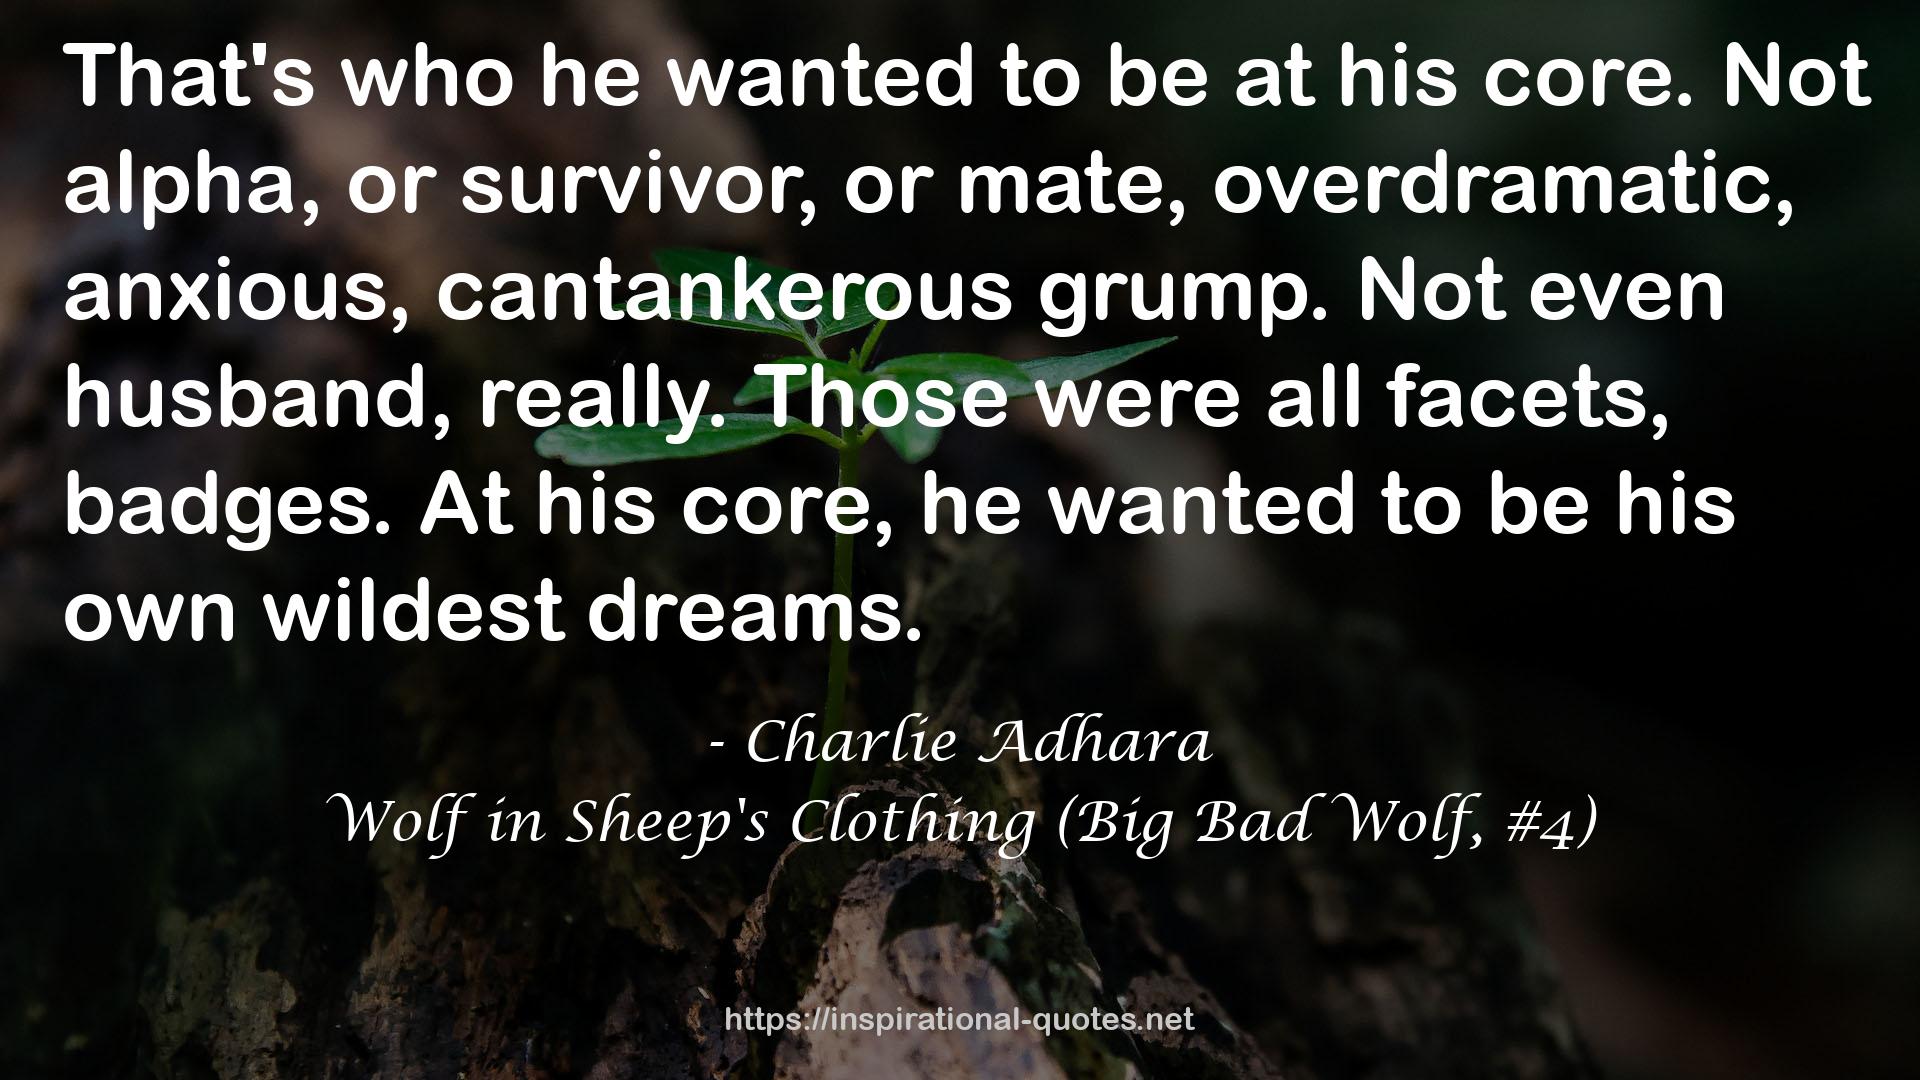 Wolf in Sheep's Clothing (Big Bad Wolf, #4) QUOTES